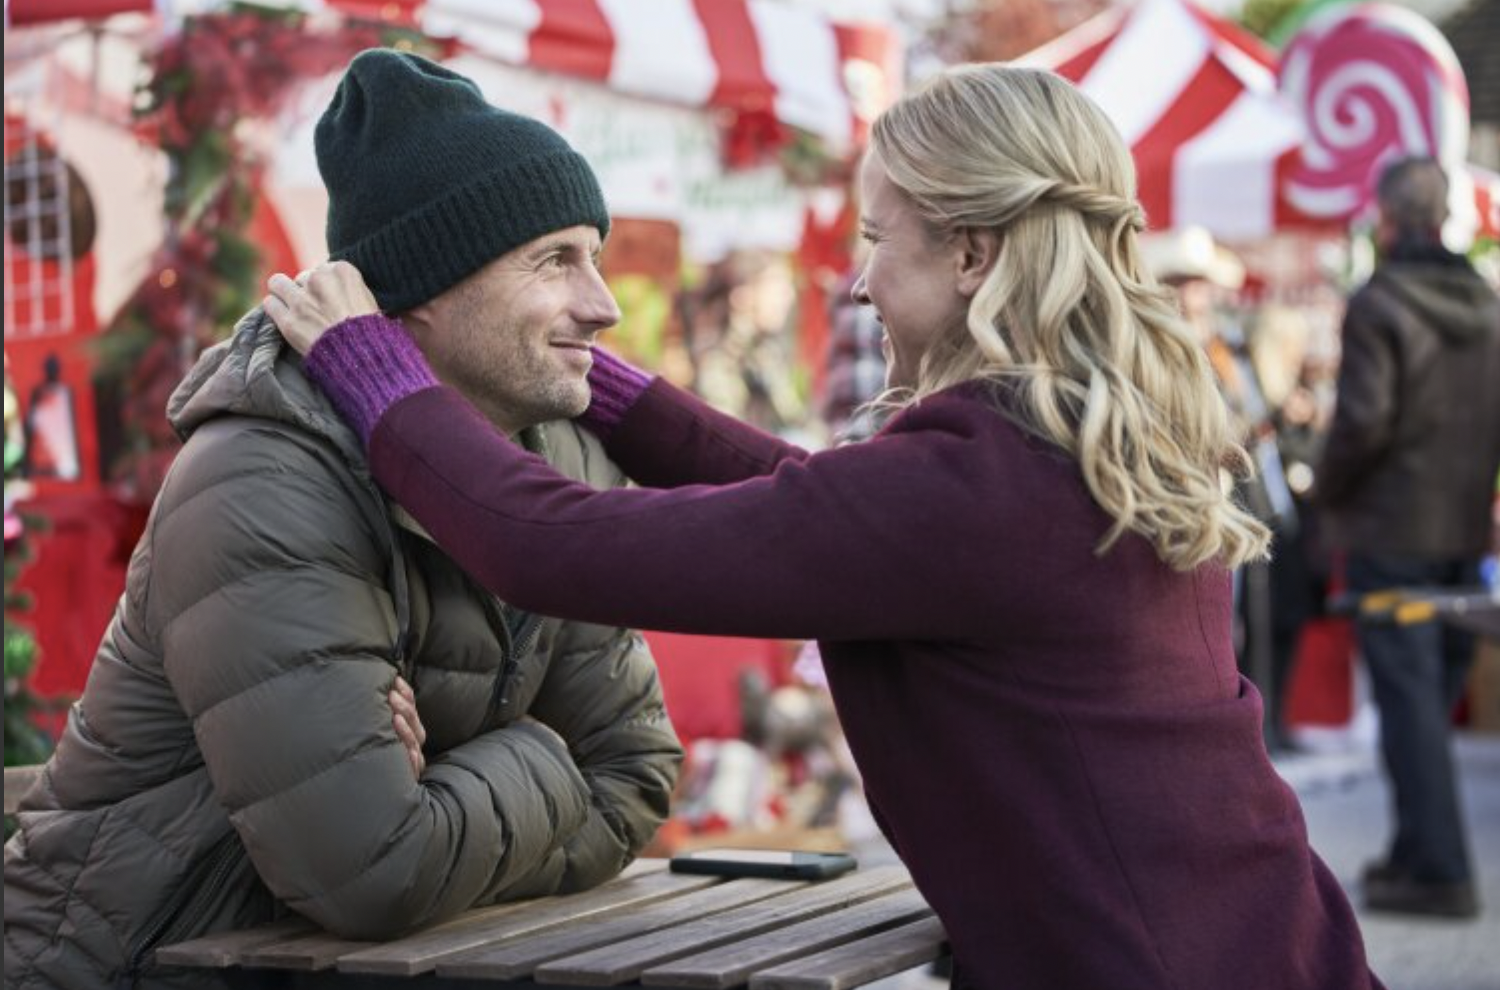 Hallmark Movies & Mysteries Original Premiere of "Time for Them to Come Home for Christmas" on Saturday, Nov. 27th at 10pm/9c #MiraclesOfChristmas